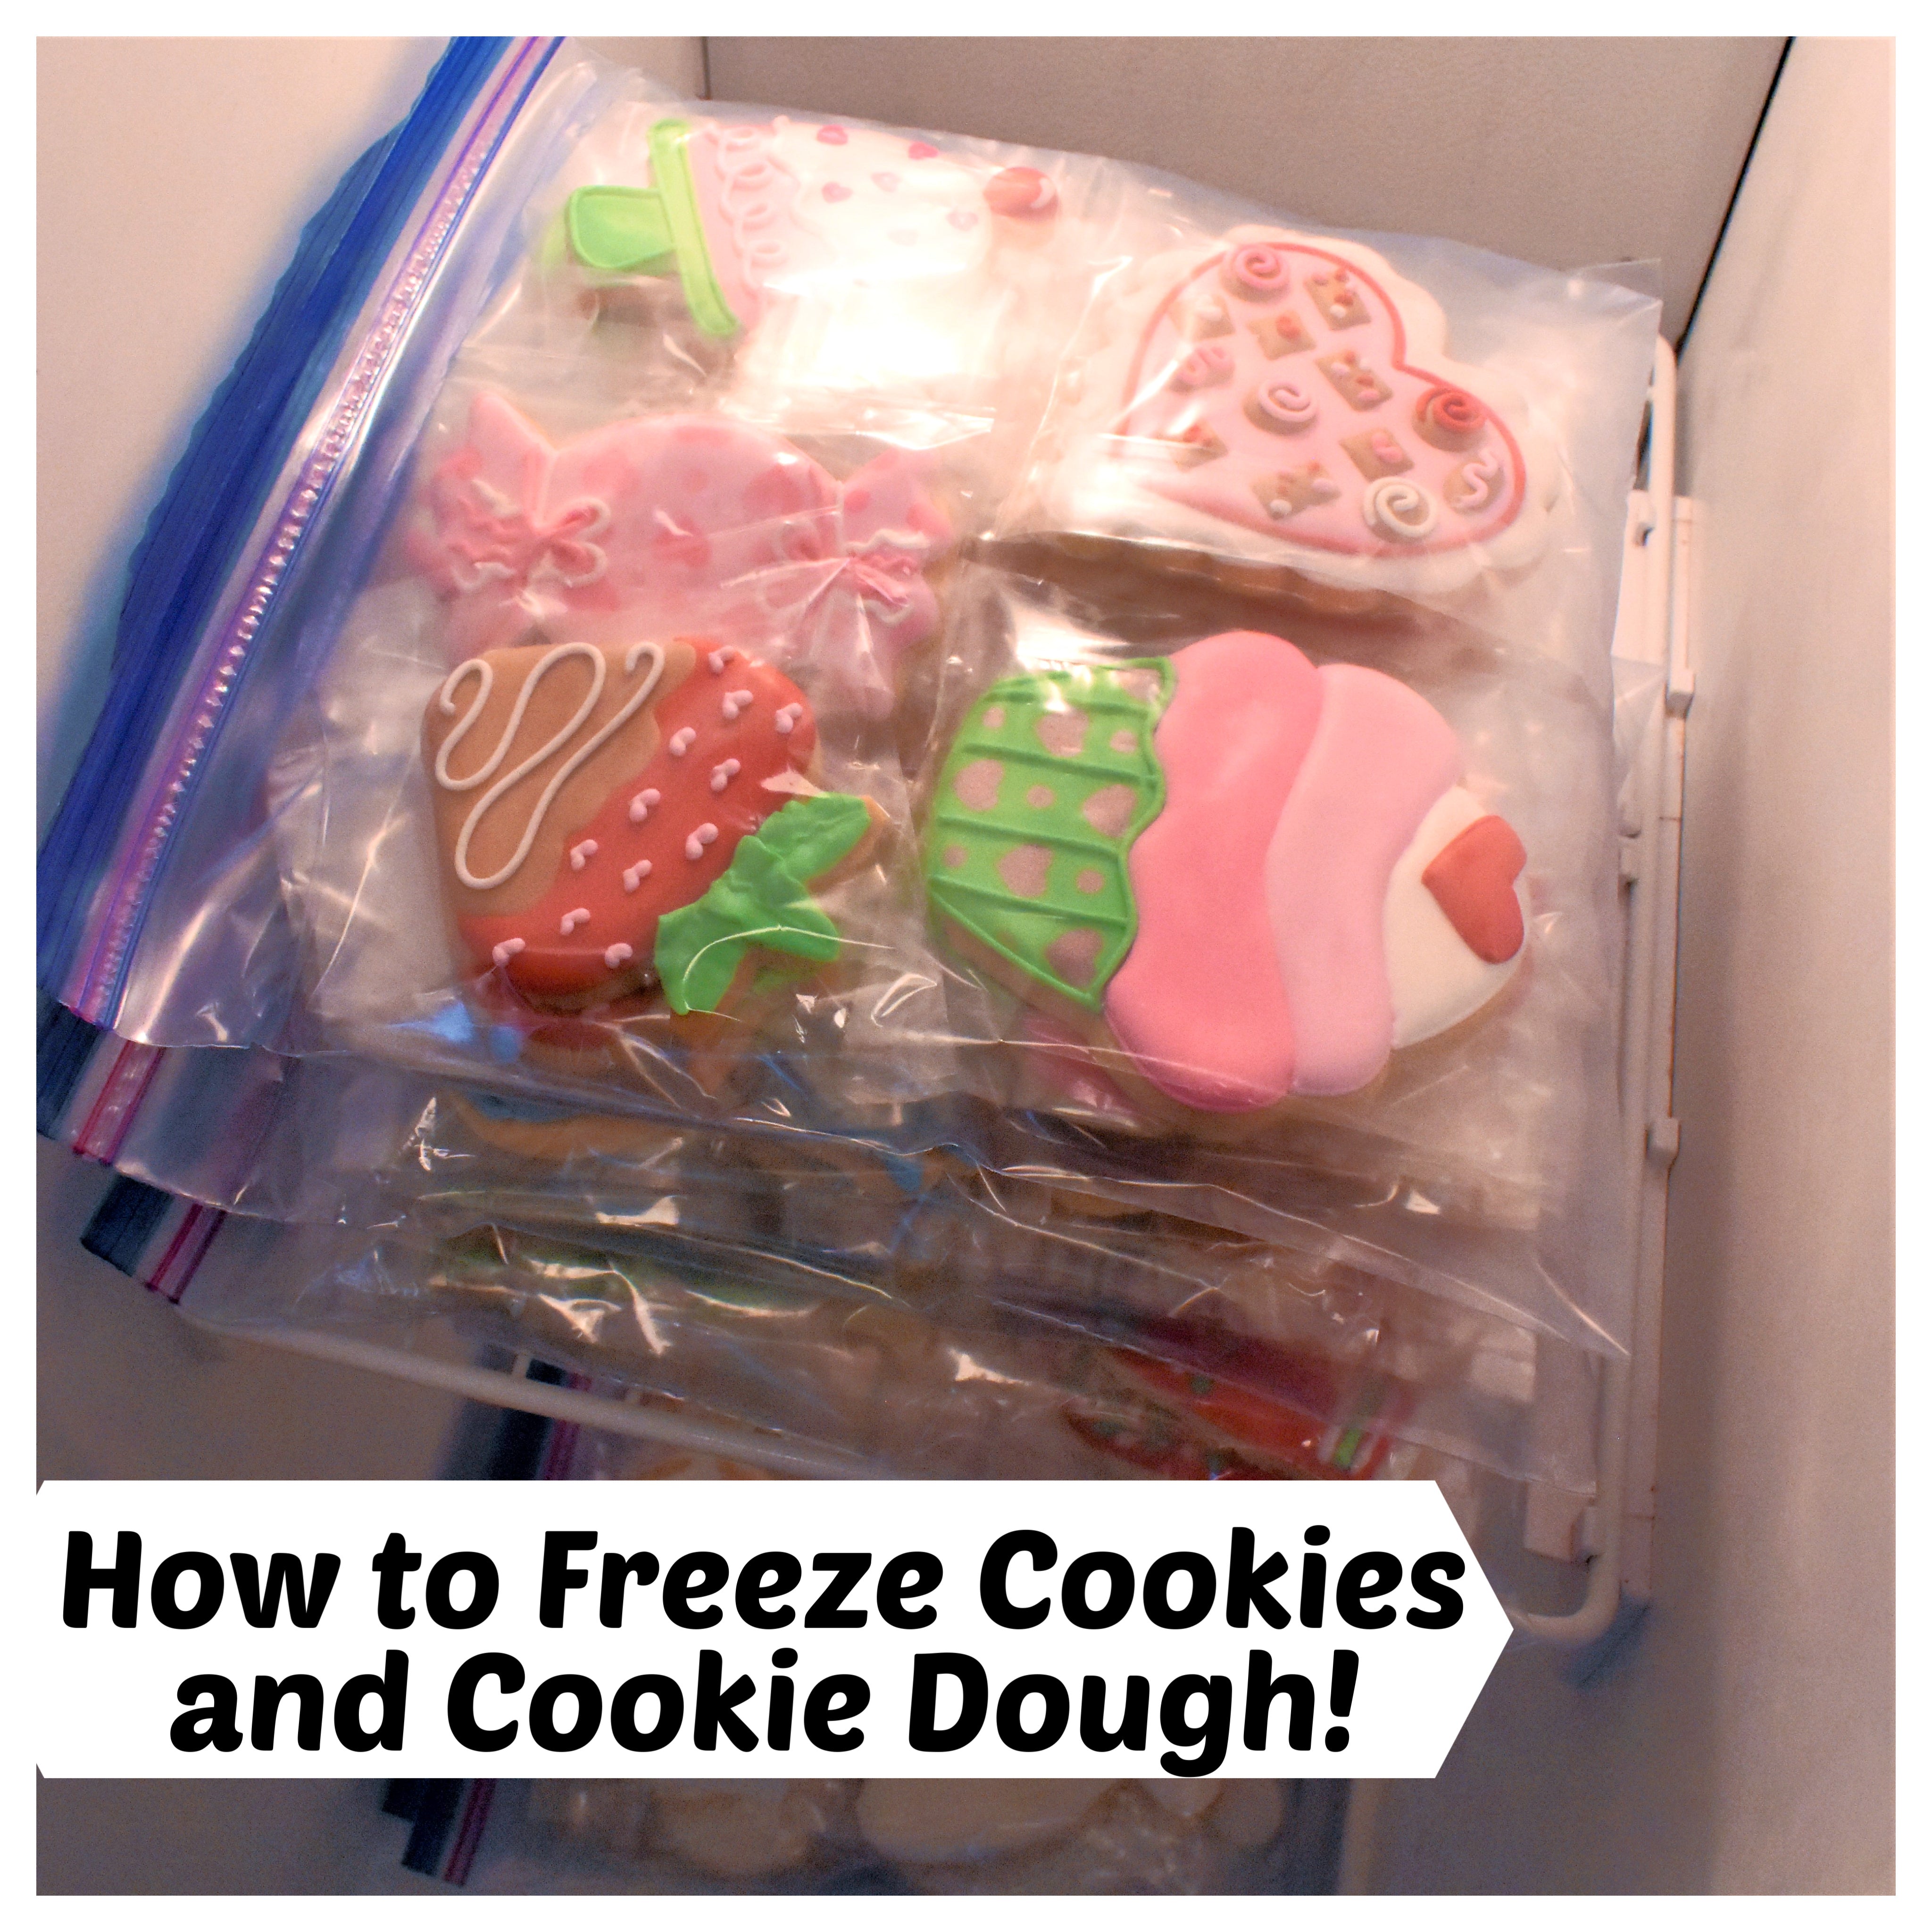 How to Freeze Cookie Dough (and Cookies) 